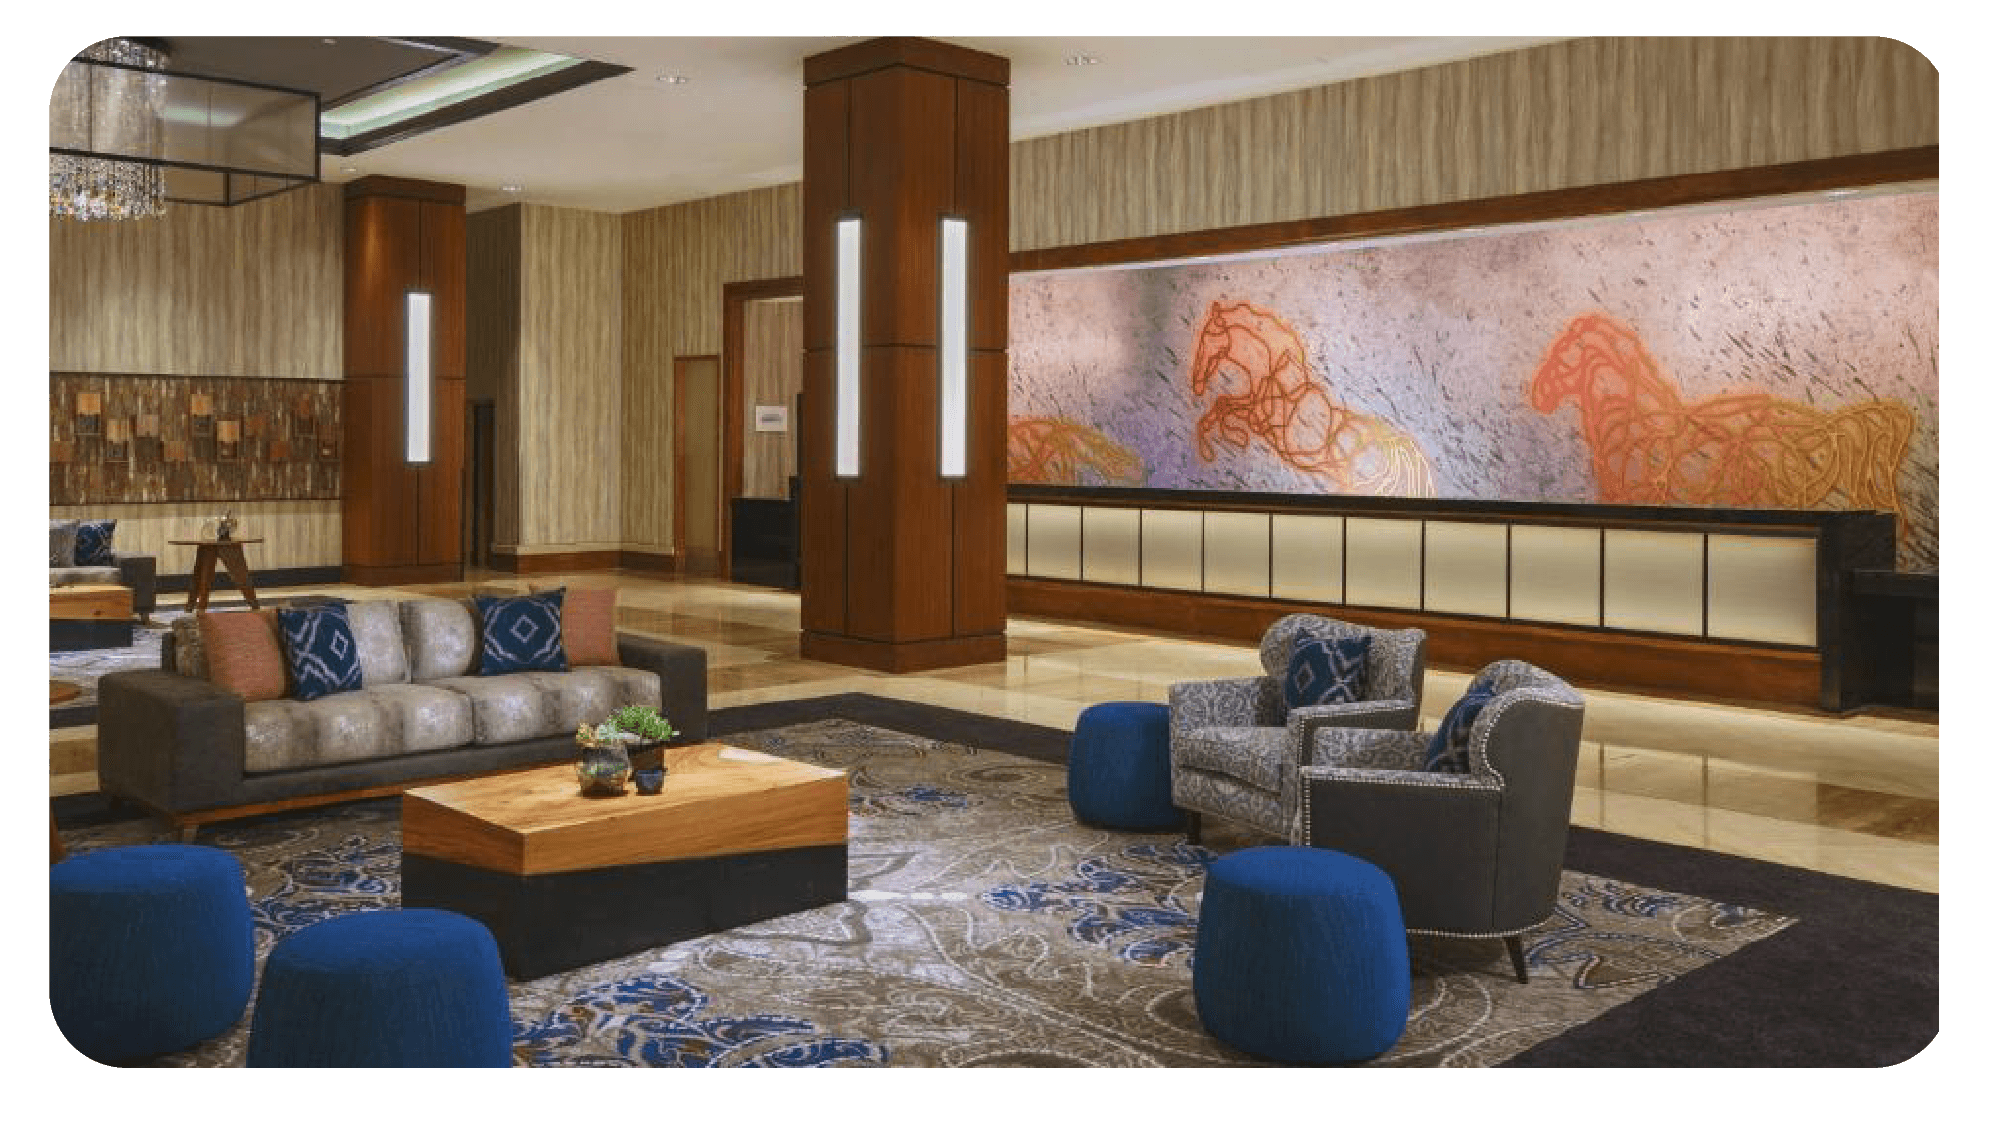 Elegant hotel lobby with plush seating, wooden accents, and anchor-themed artwork on the walls.